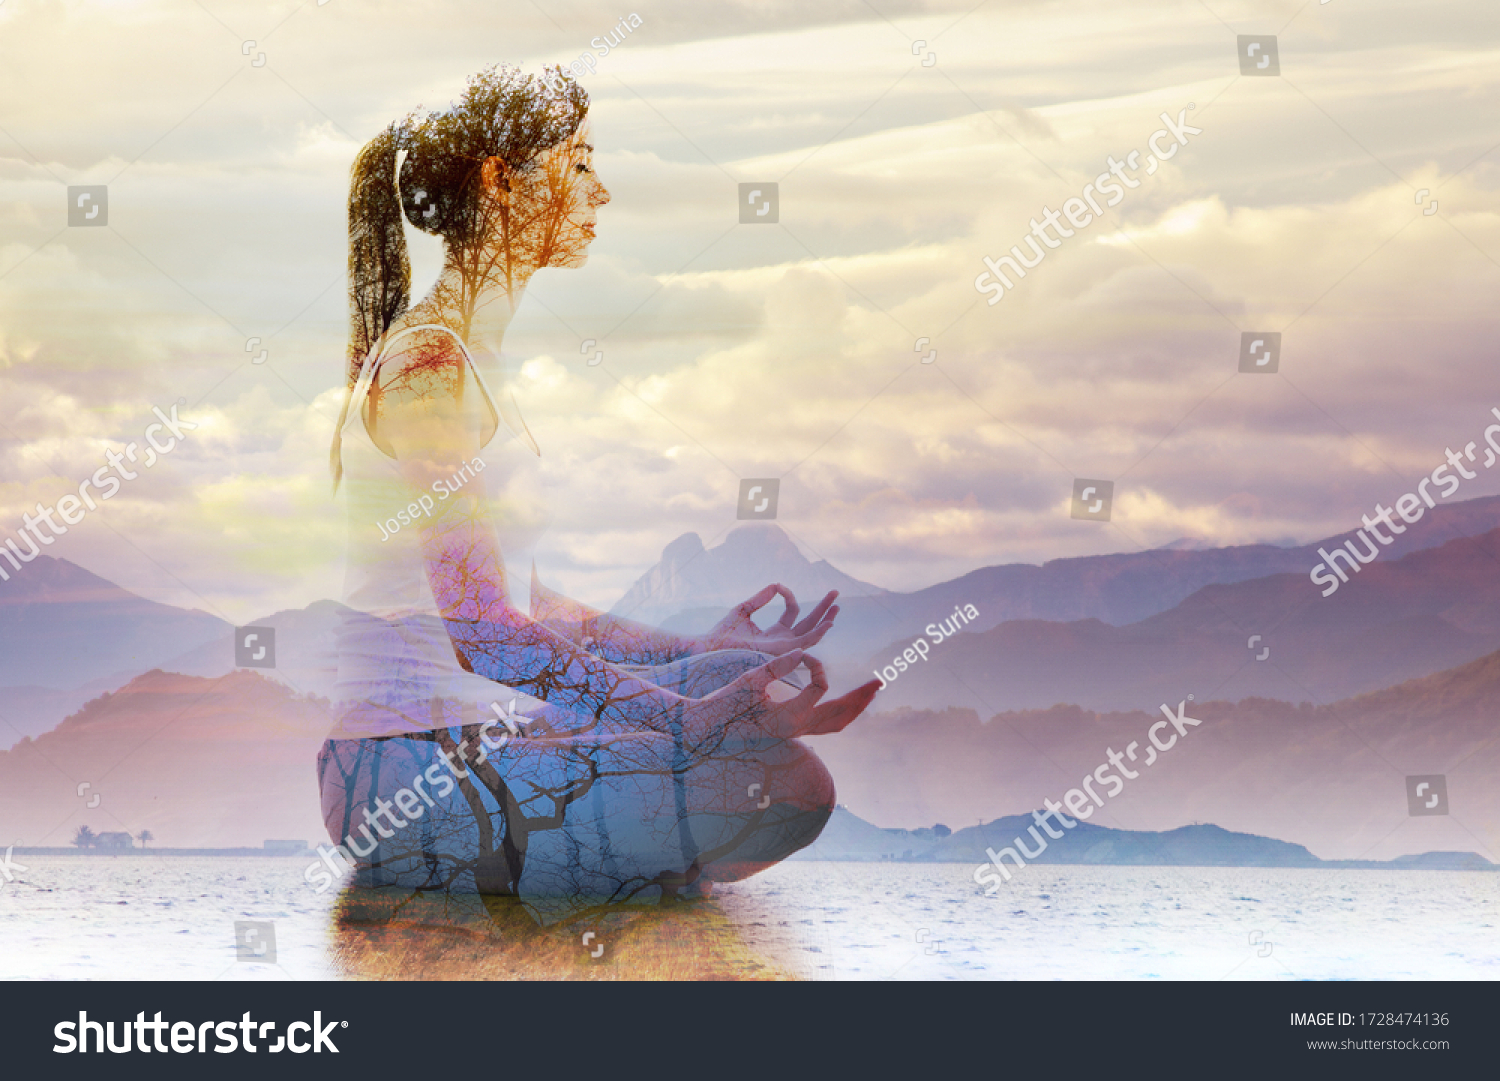 Double exposure of silhouette of woman doing yoga in lotus position over lake landscape. Concept of connection with the universe and nature. #1728474136